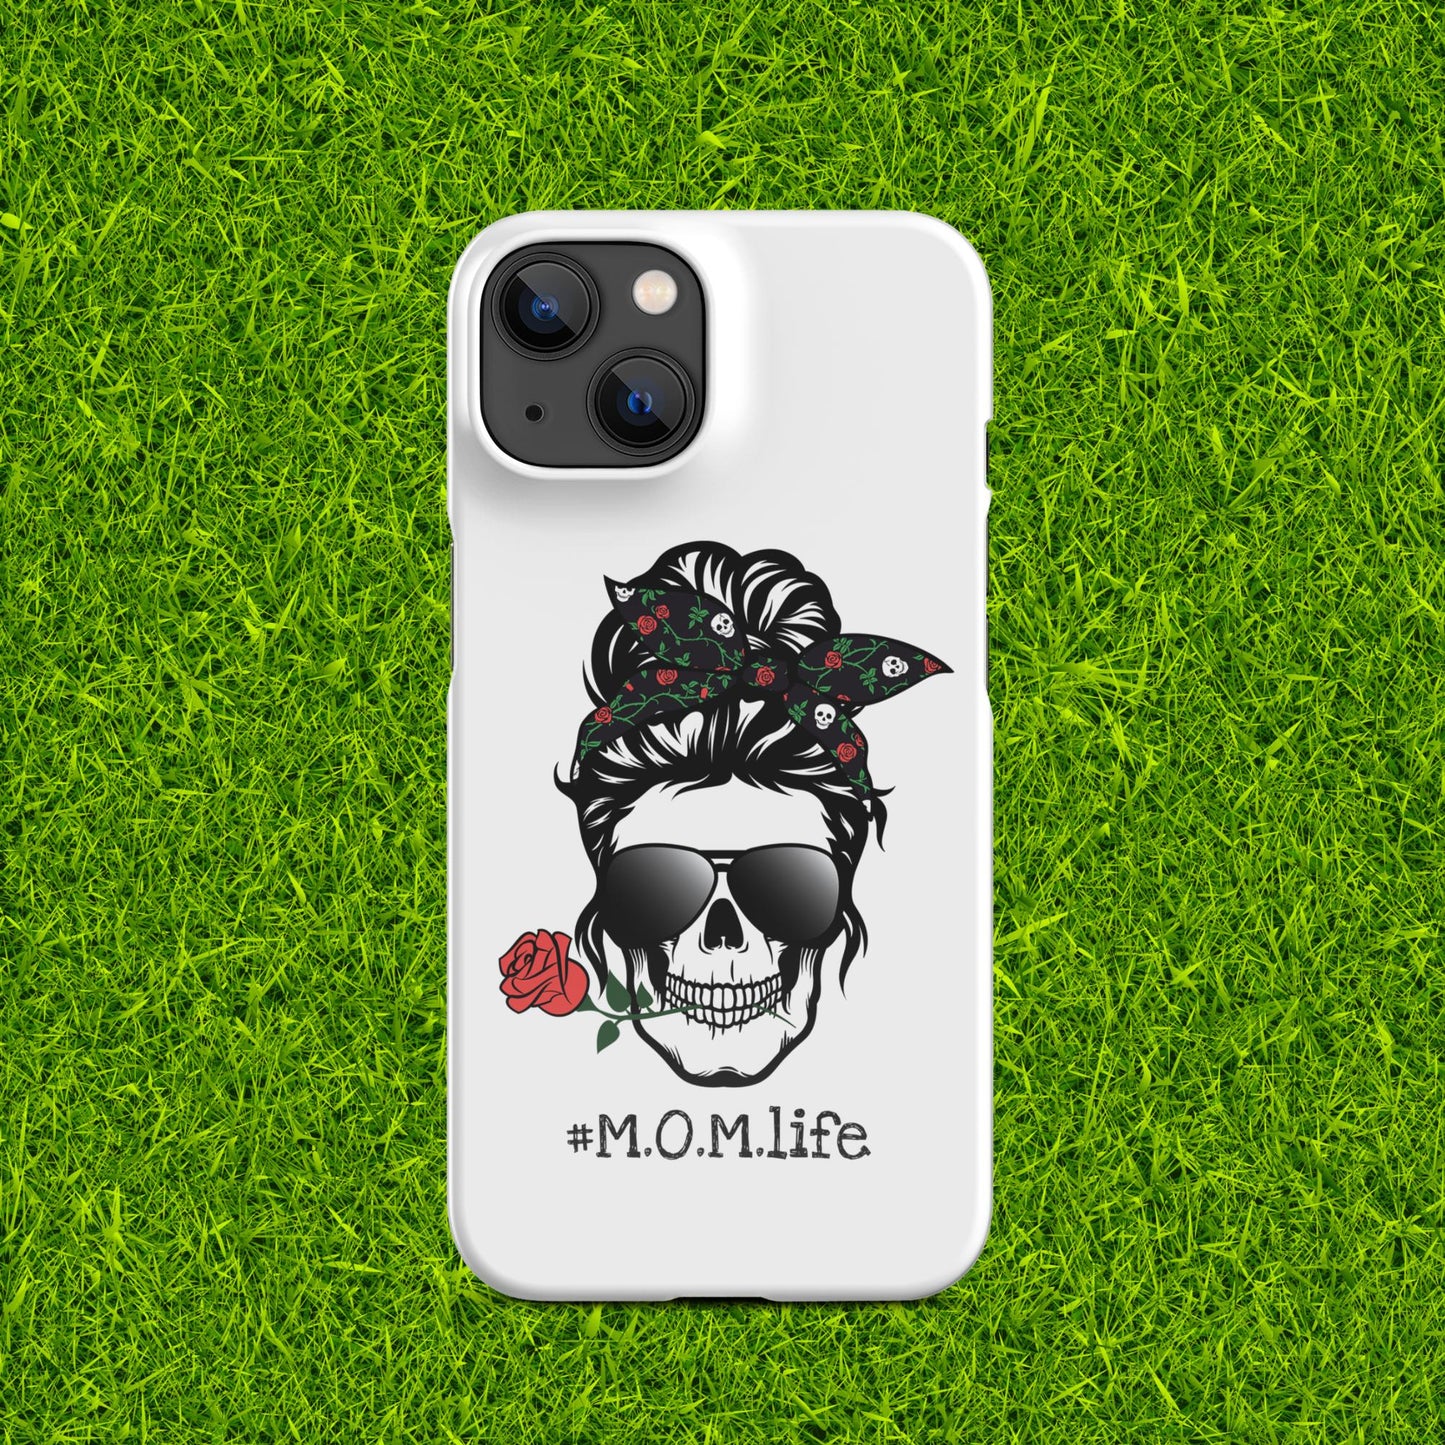 Snap case for iPhone® | #M.O.M.life